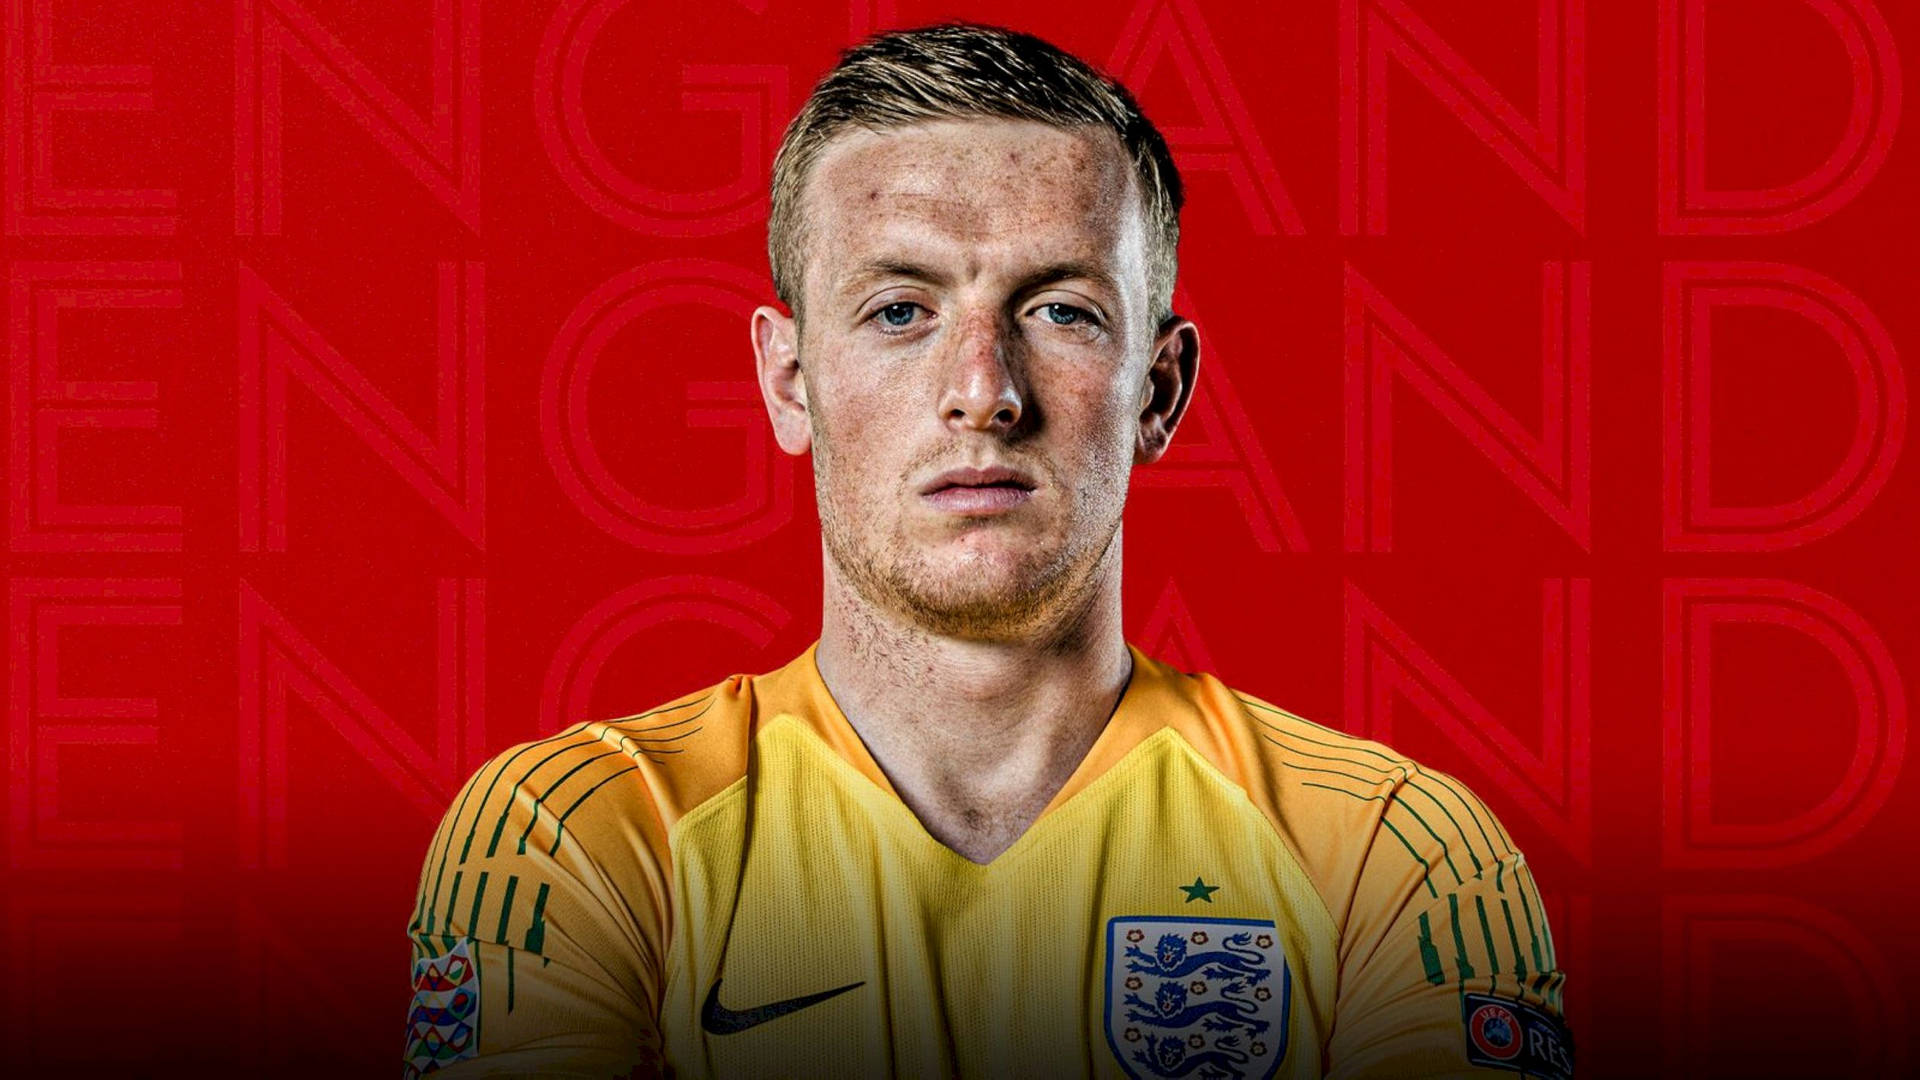 Jordan Pickford With Red Background